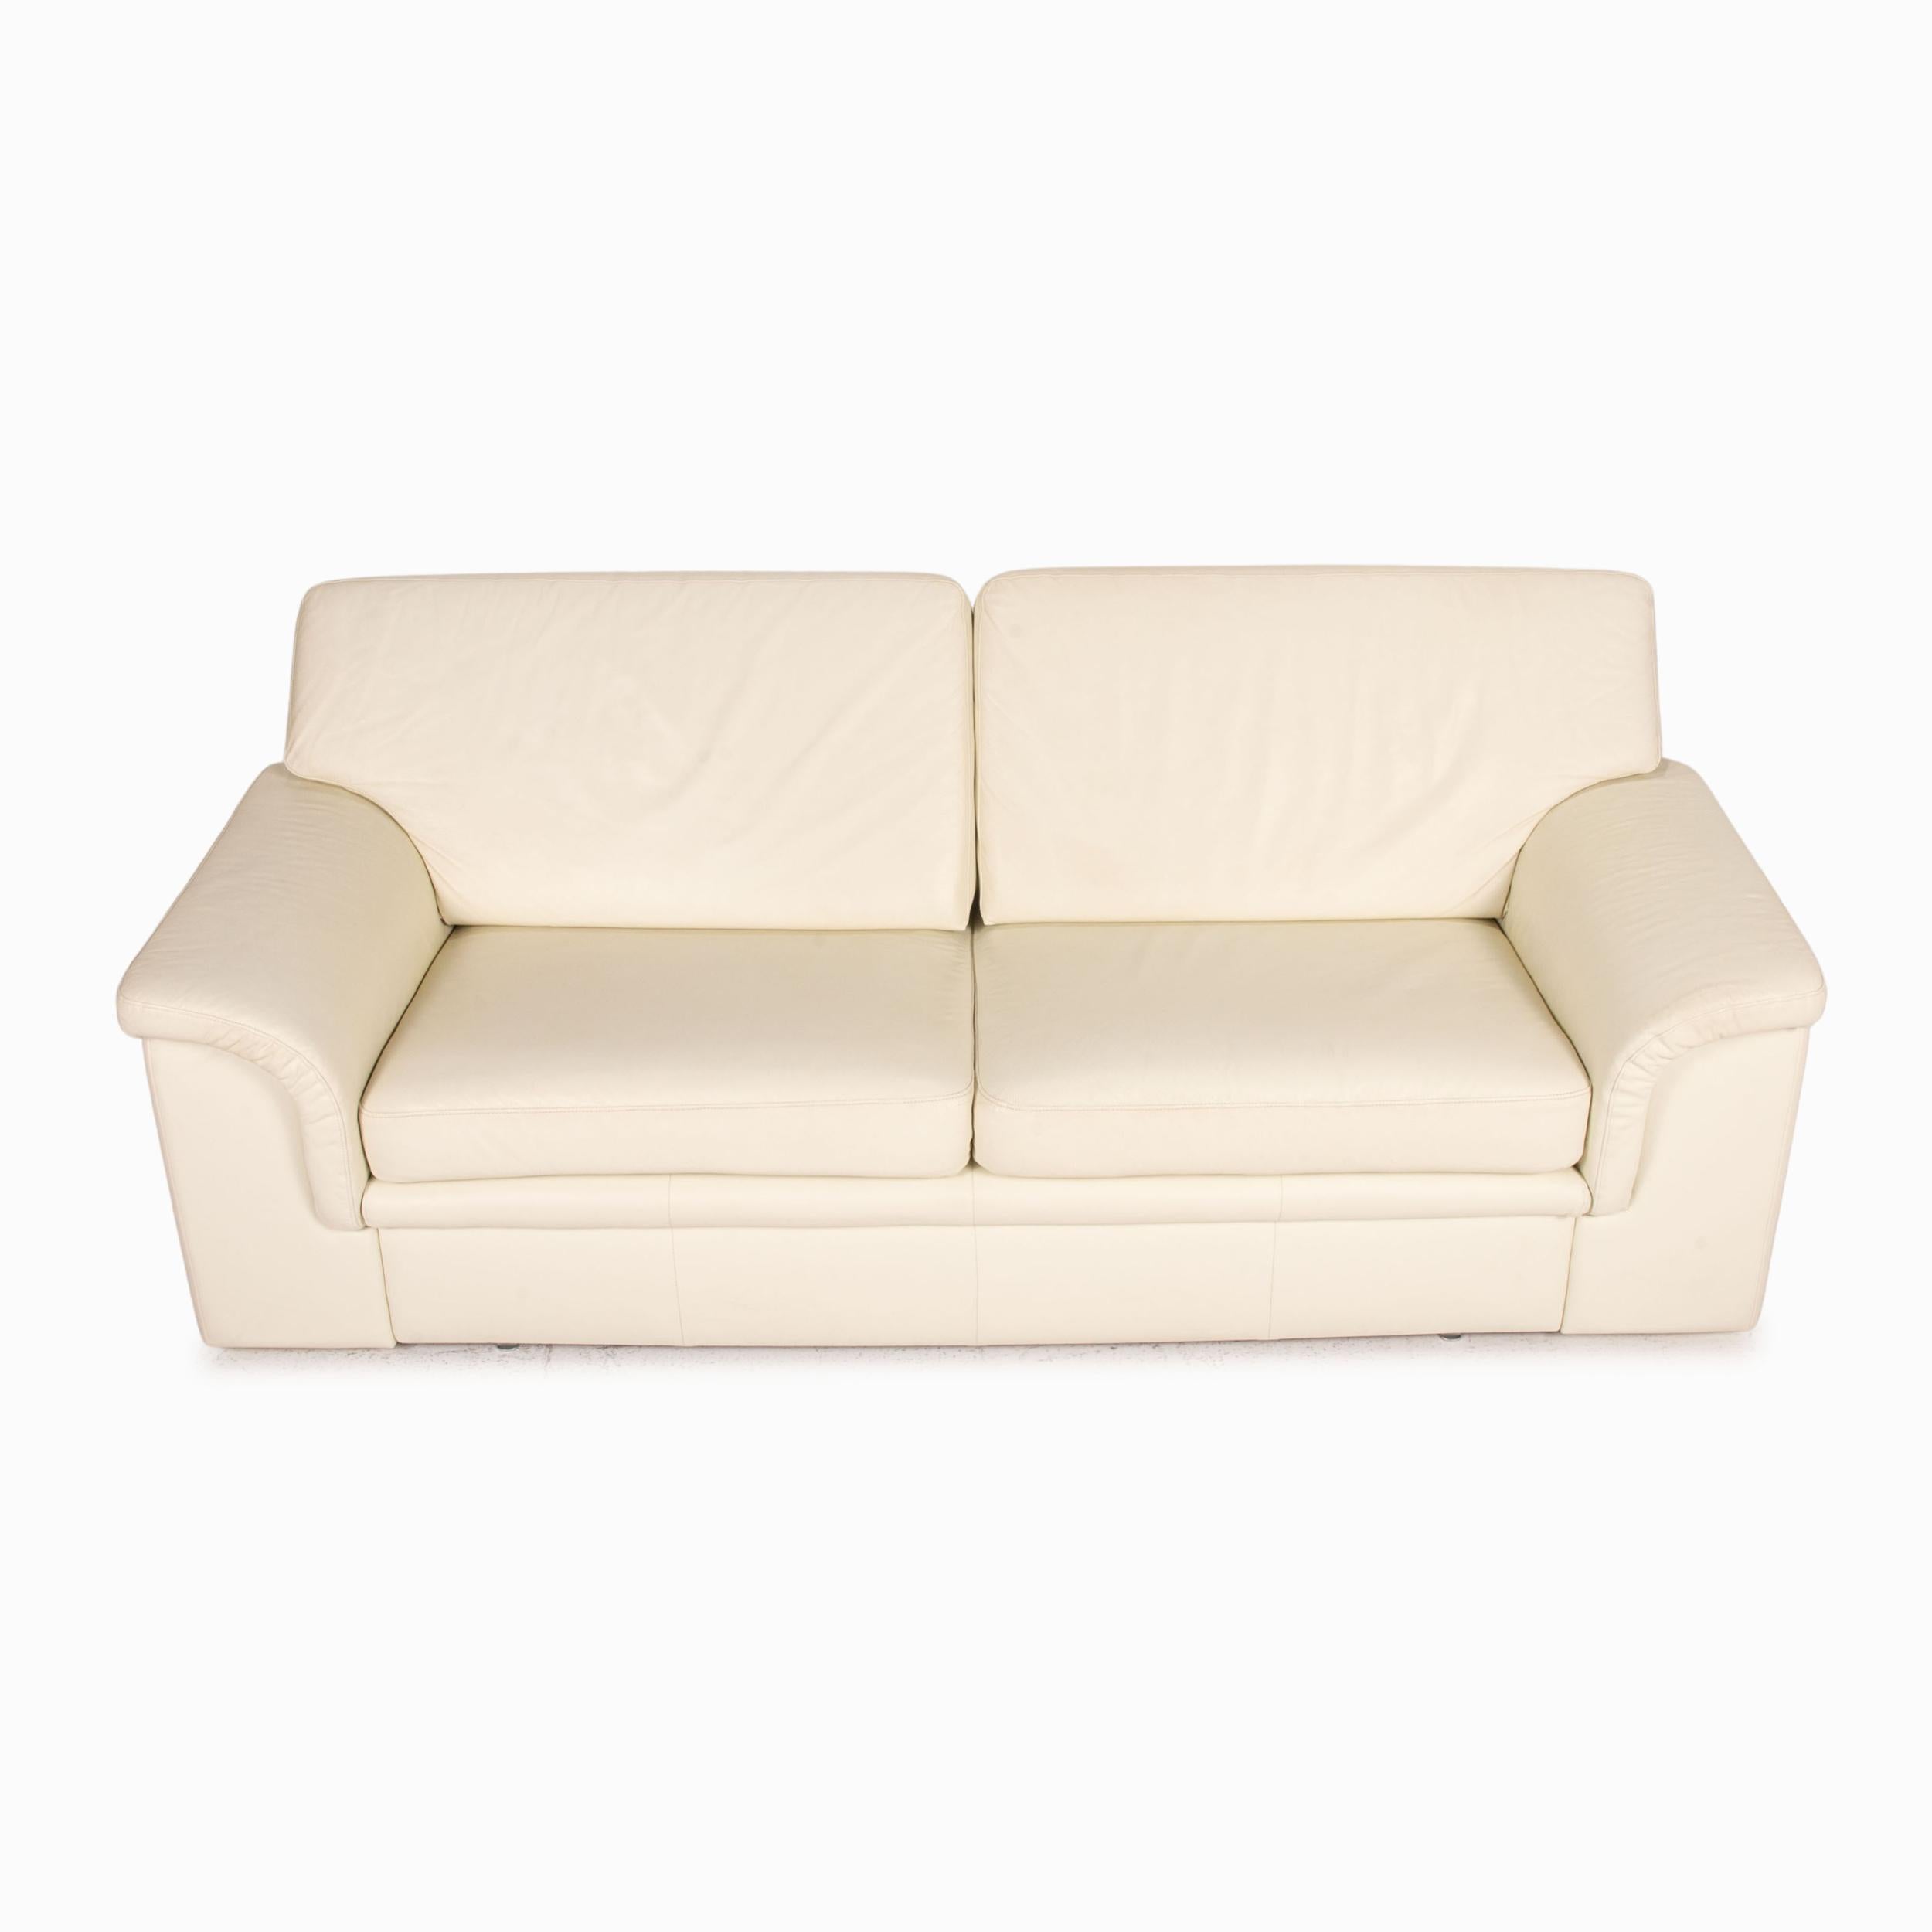 Modern Musterring Leather Sofa Bed Cream Two-Seater Function Sleeping Function Couch For Sale